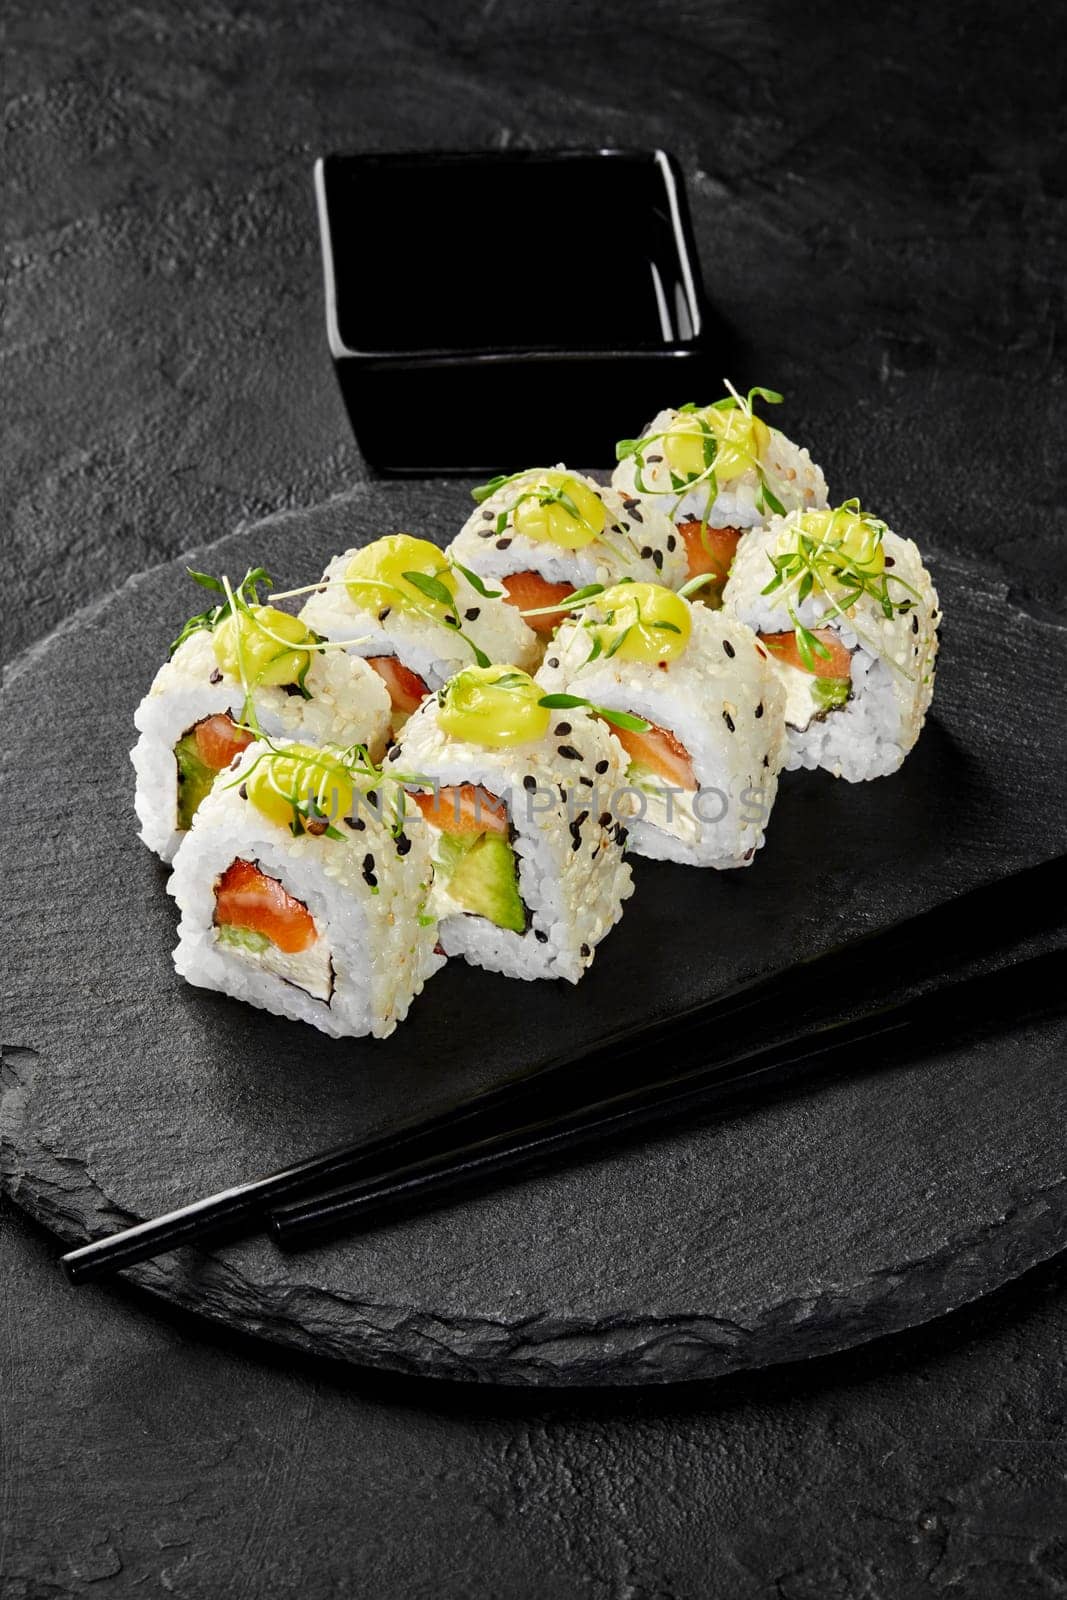 Colorful sesame coated sushi rolls filled with salmon, avocado and cream cheese garnished with spicy mayo and greens traditionally served with soy sauce on black slate serving board. Japanese cuisine